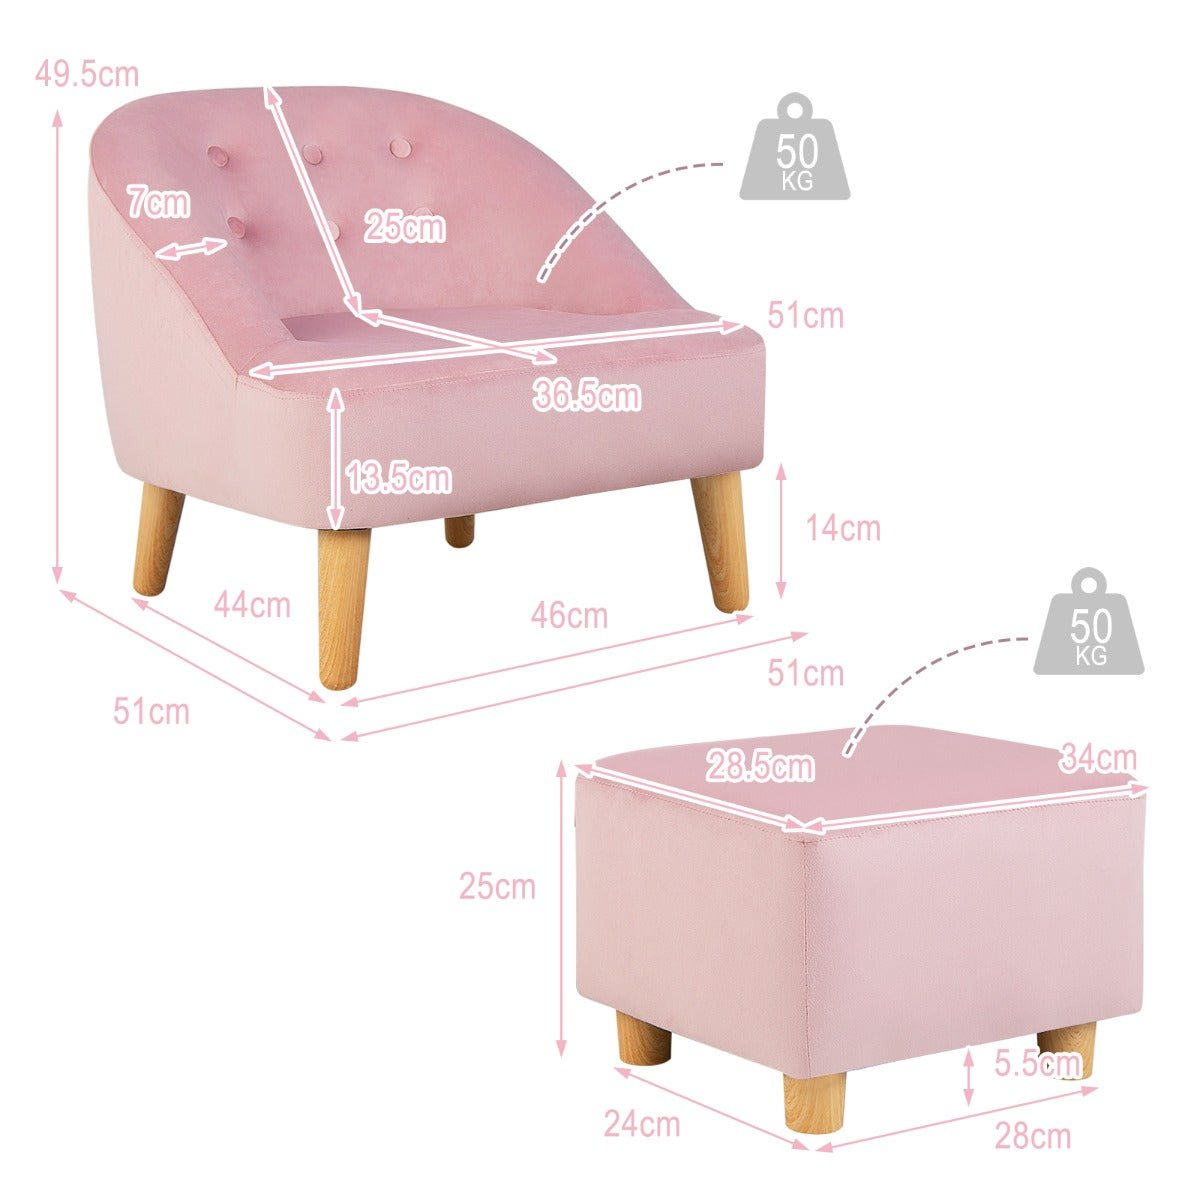 Toddler Pink Sofa Chair & Stool - Ages 3-5, Comfy Seating